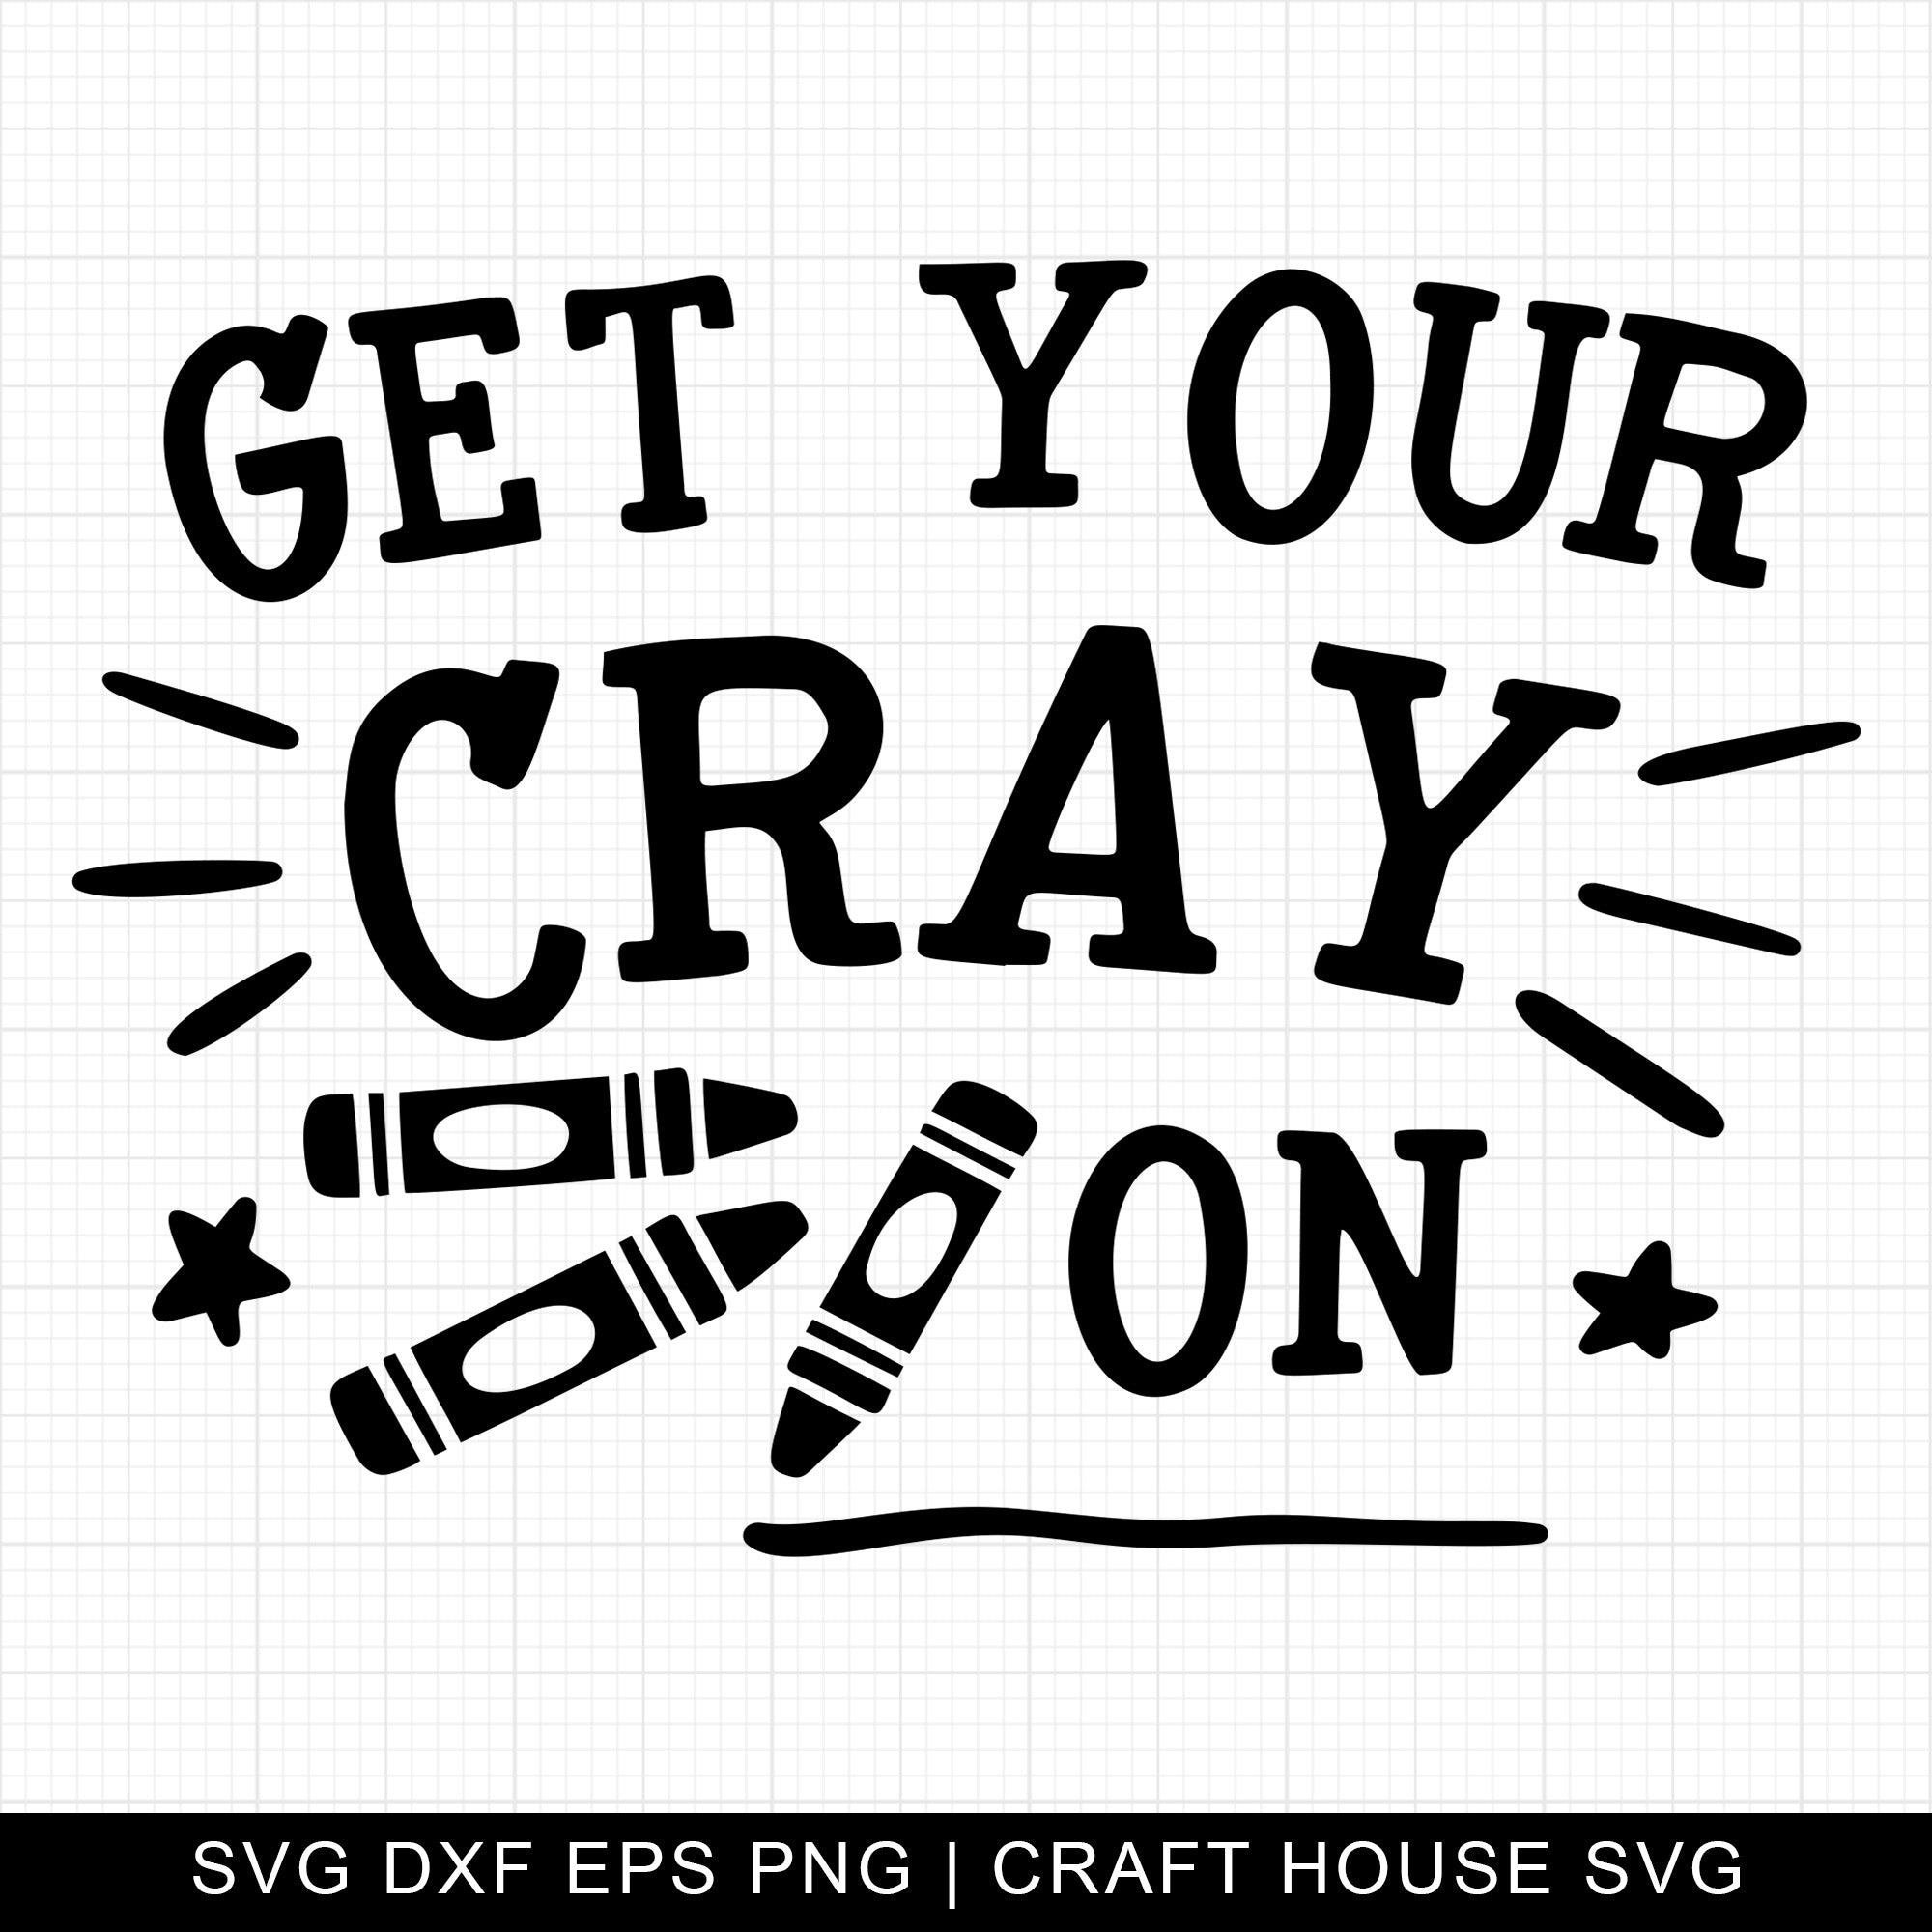 Get your cray on SVG | M5F6